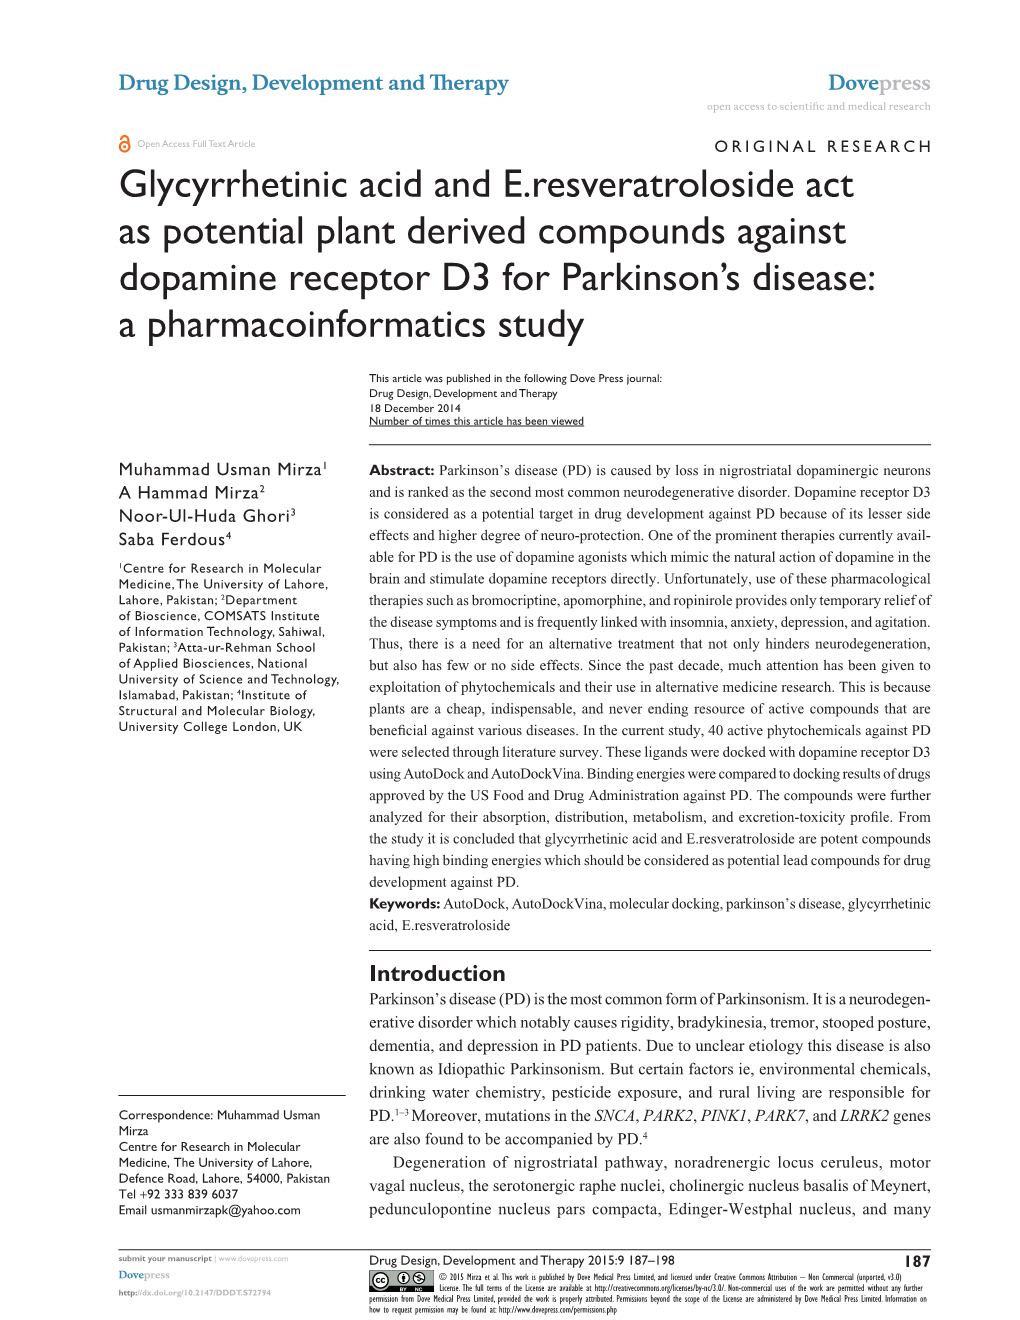 Glycyrrhetinic Acid and E.Resveratroloside Act As Potential Plant Derived Compounds Against Dopamine Receptor D3 for Parkinson’S Disease: a Pharmacoinformatics Study